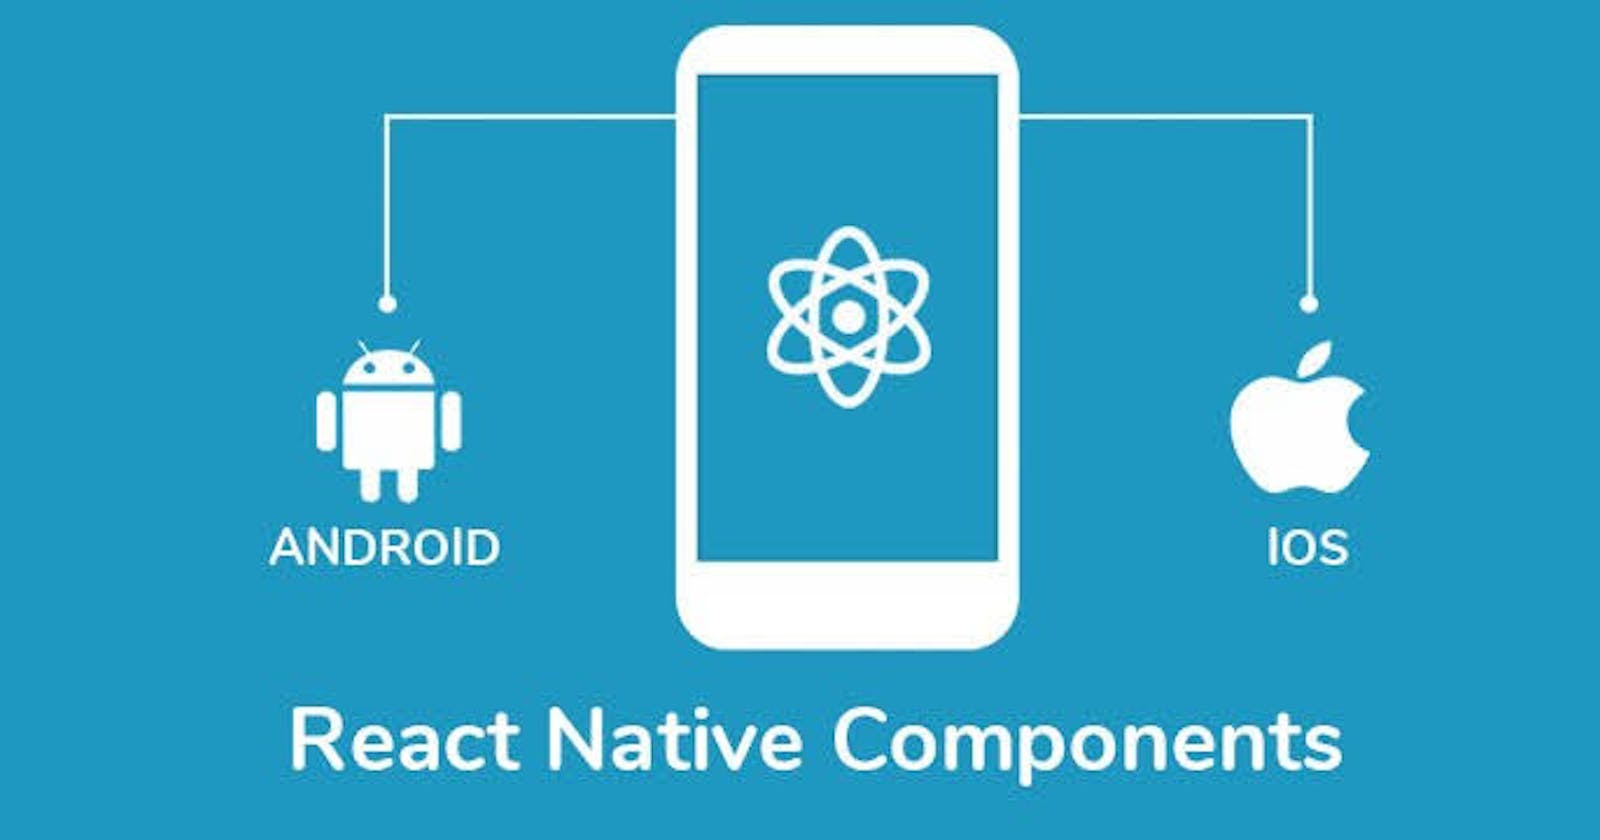 Introduction to react-native components